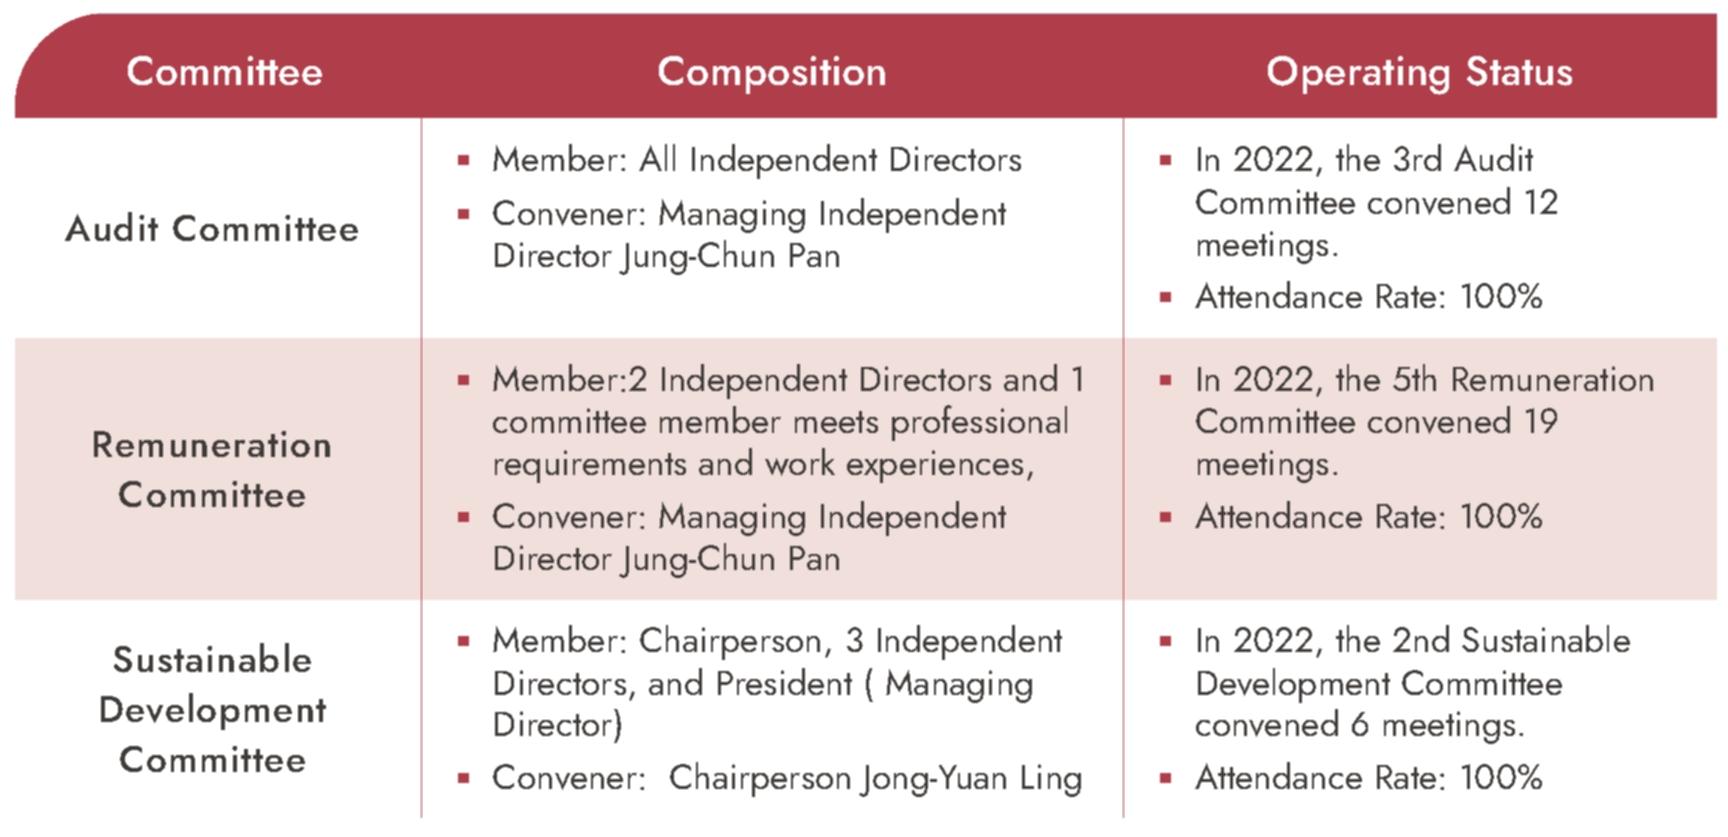 Functional Committees of the Board of Directors